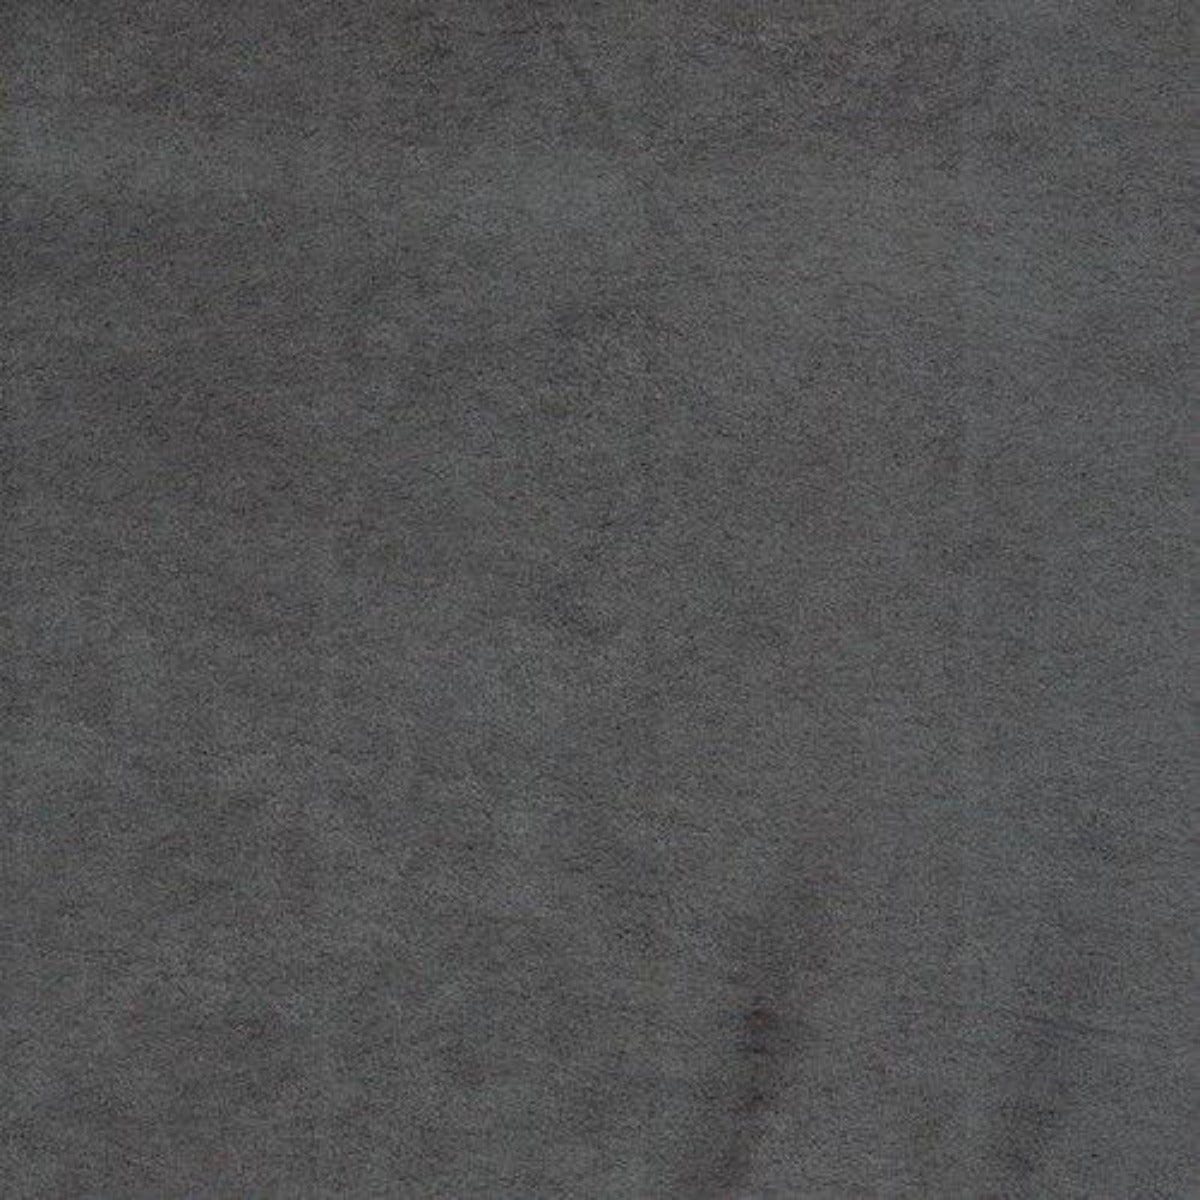 Charcoal Microsuede Upholstery Drapery Crafting Fabric – Fashion